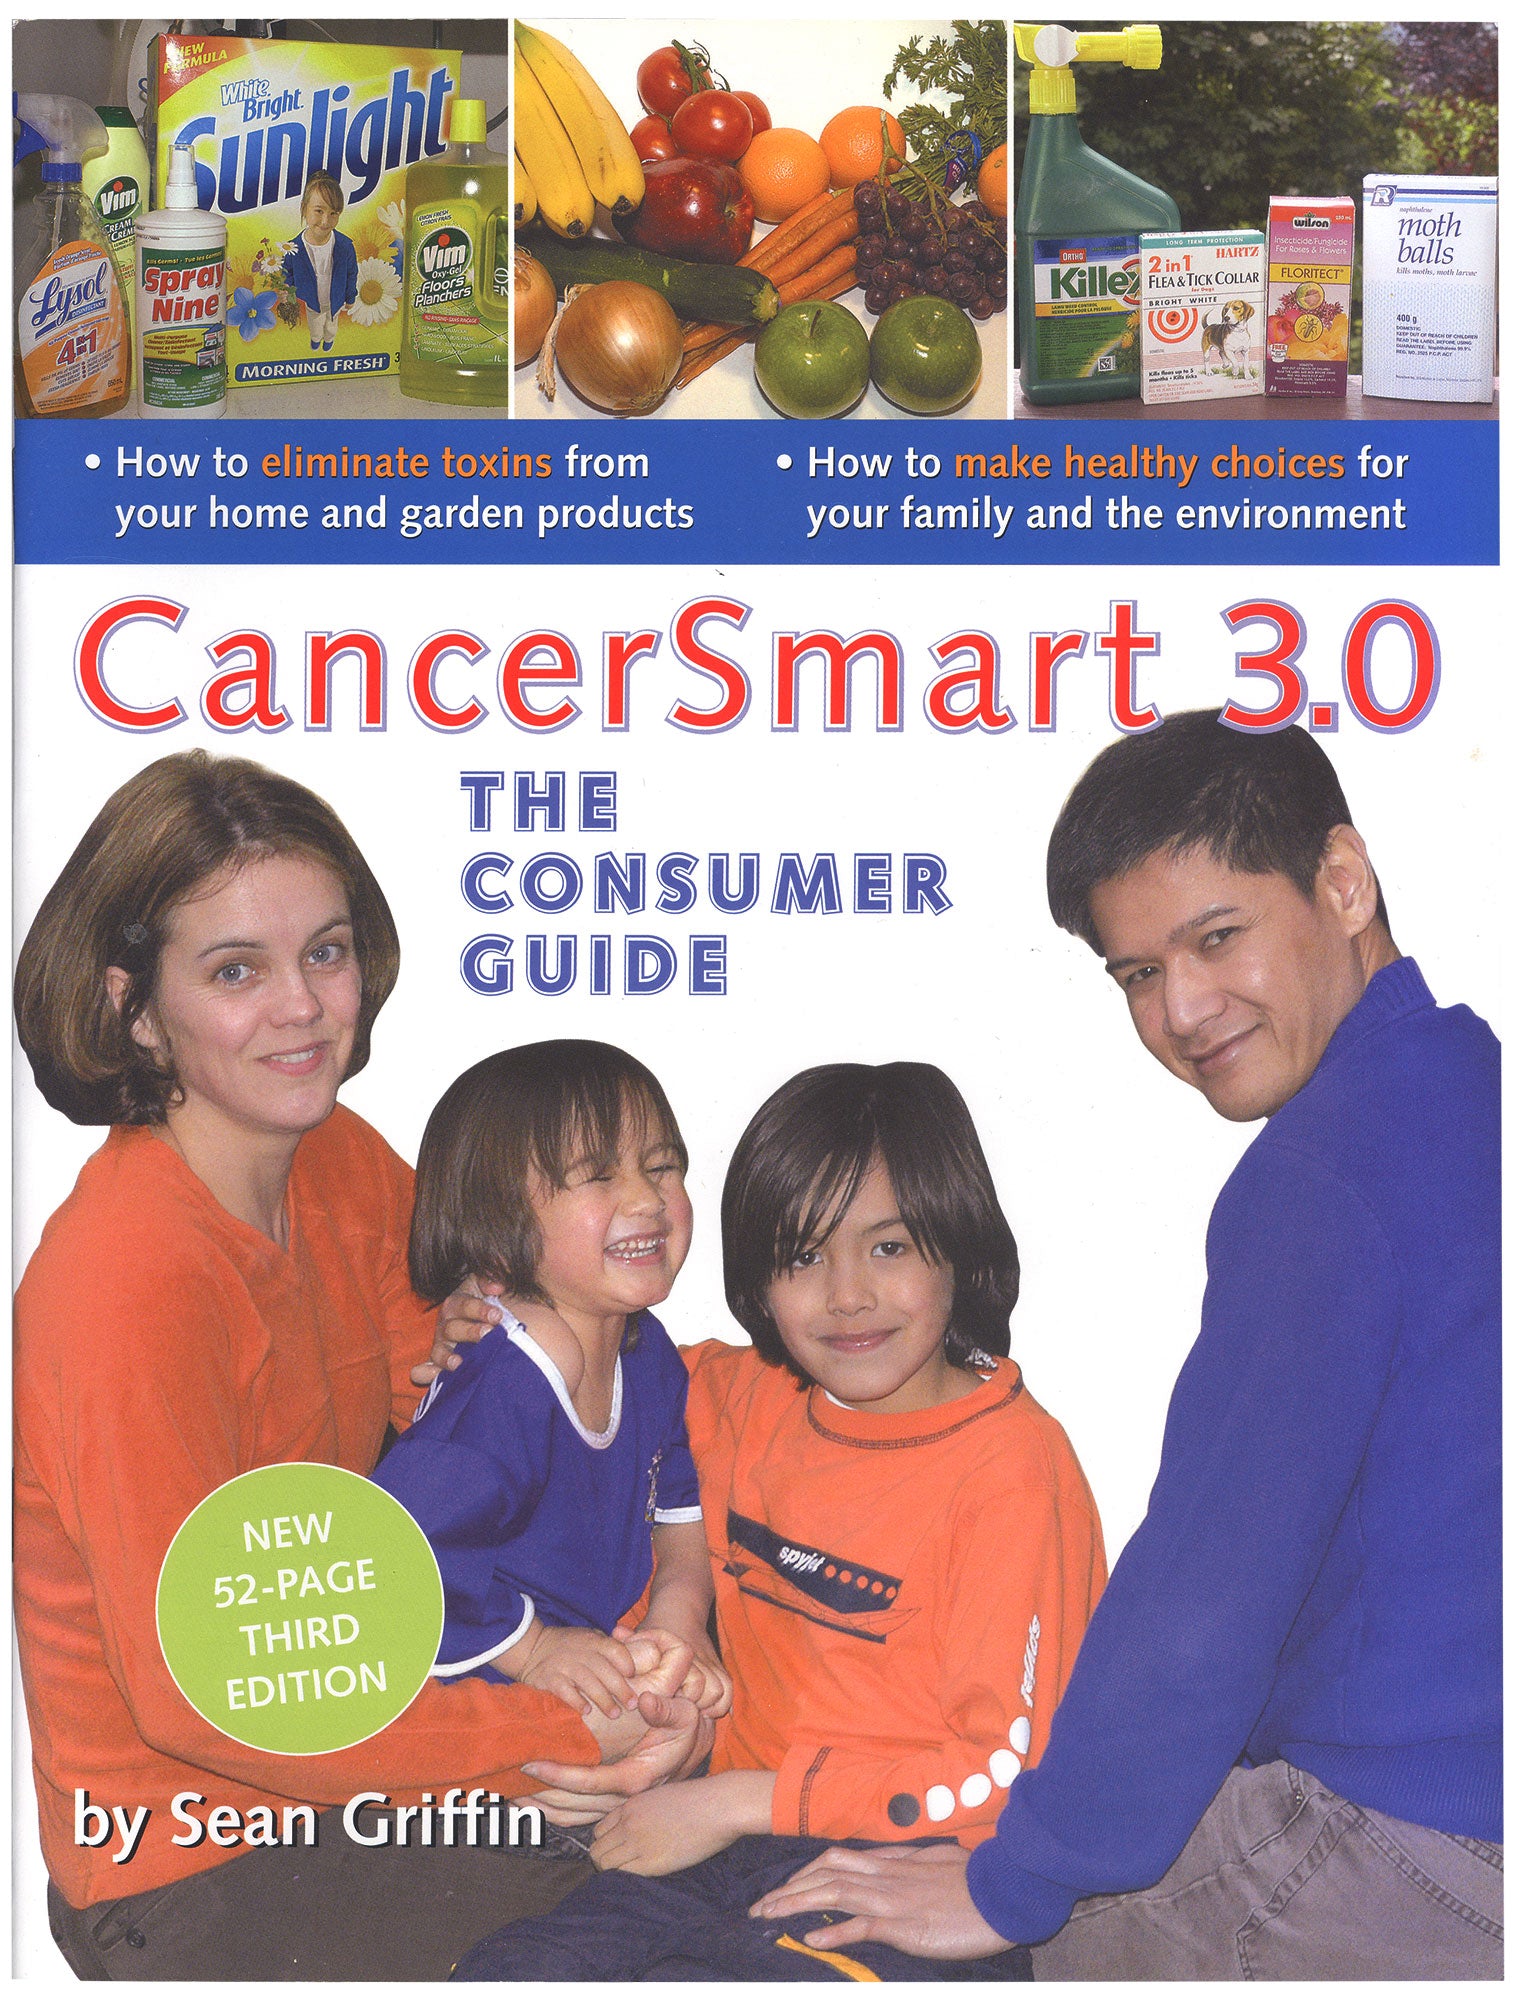 A book. There is a family of four on the cover. There are also images of household cleaners, produce and gardening equipment. Text on the cover says "CancerSmart 3.0: The consumer guide. New 52-page third edition. By Sean Griffin. "How to eliminate toxics from your home and garden products. How to make healthy choices for your family and the environment." End of image description.